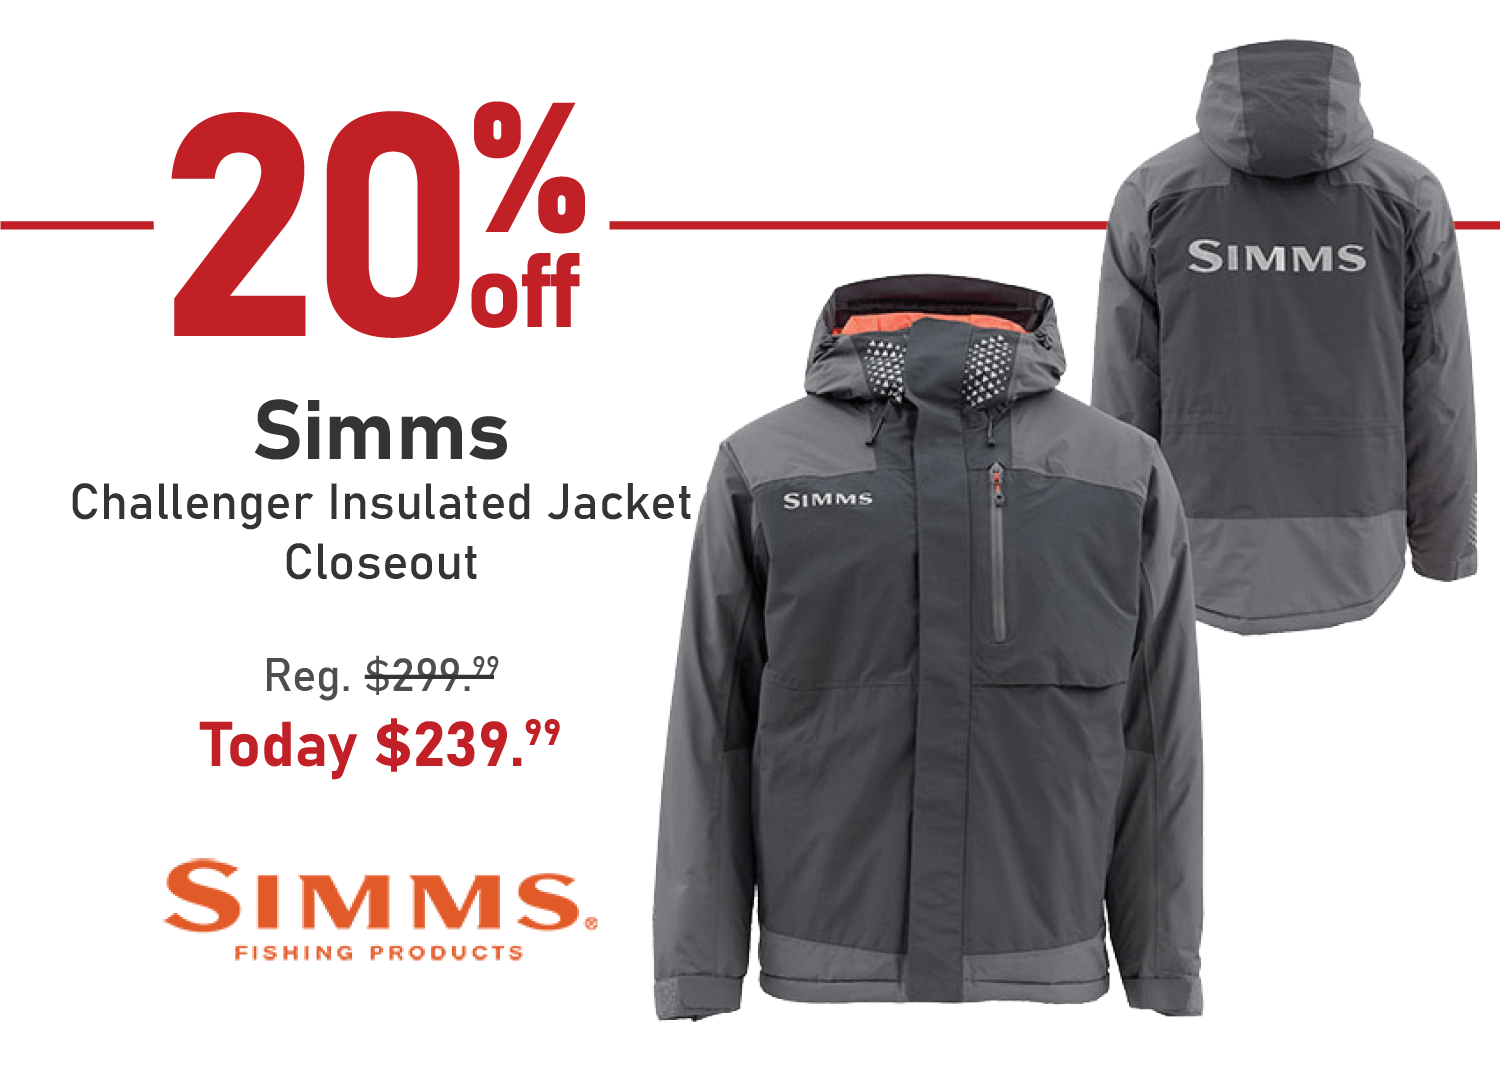 Save 20% on the Simms Challenger Insulated Jacket - Closeout